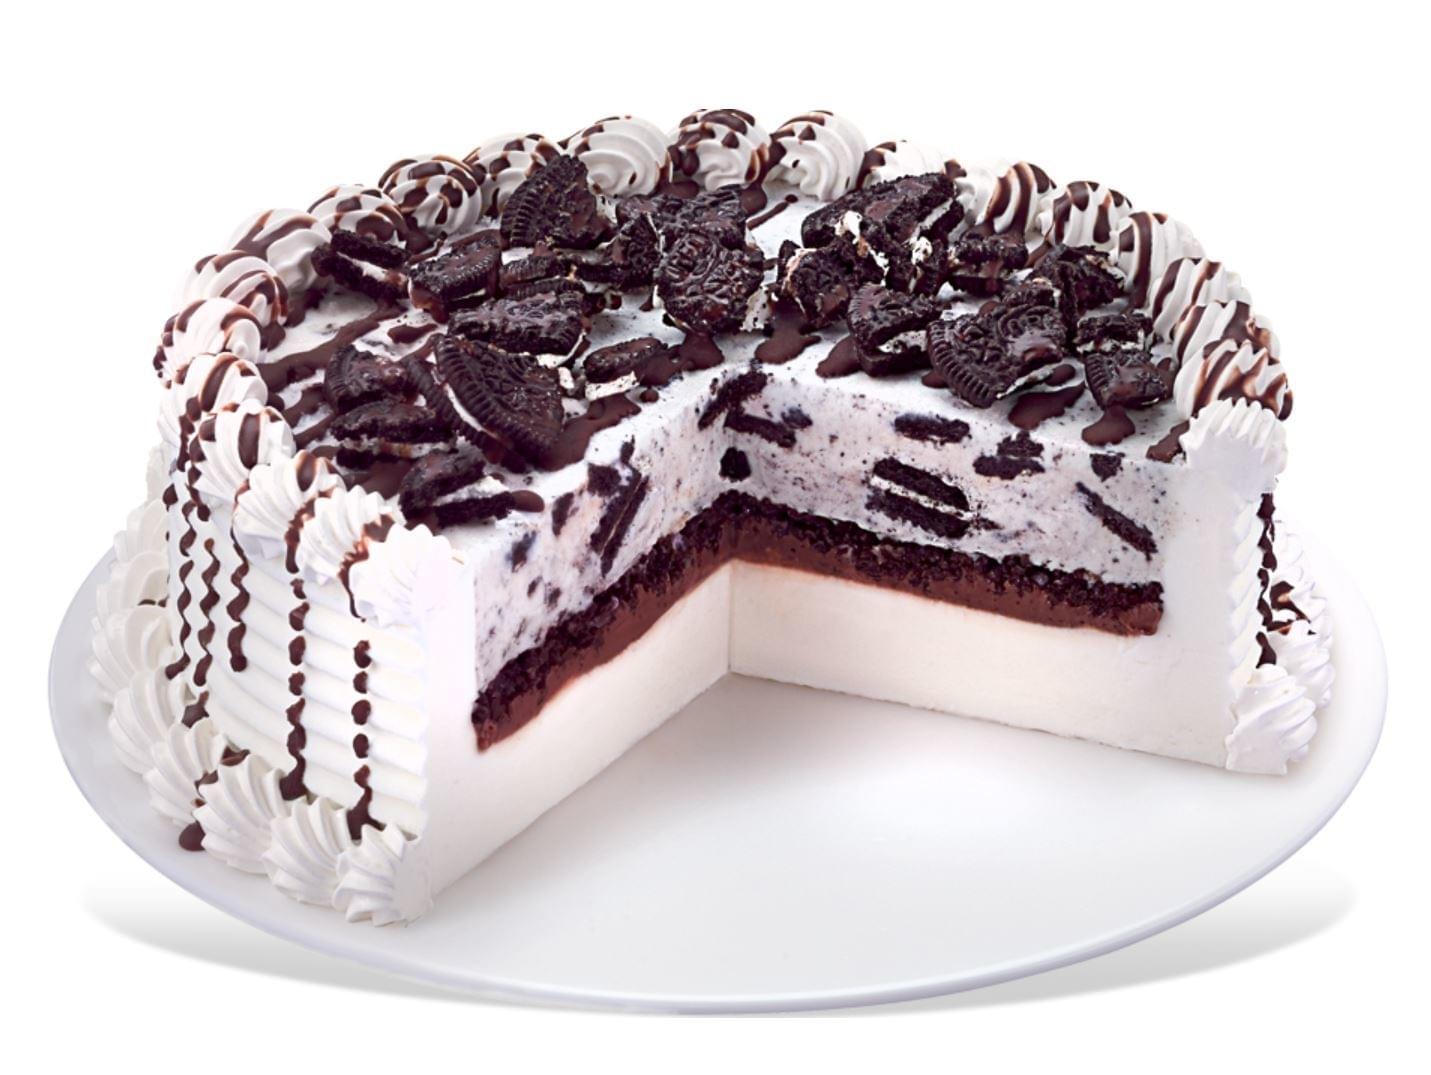 Dairy Queen 10 inch Oreo Blizzard Cake Nutrition Facts